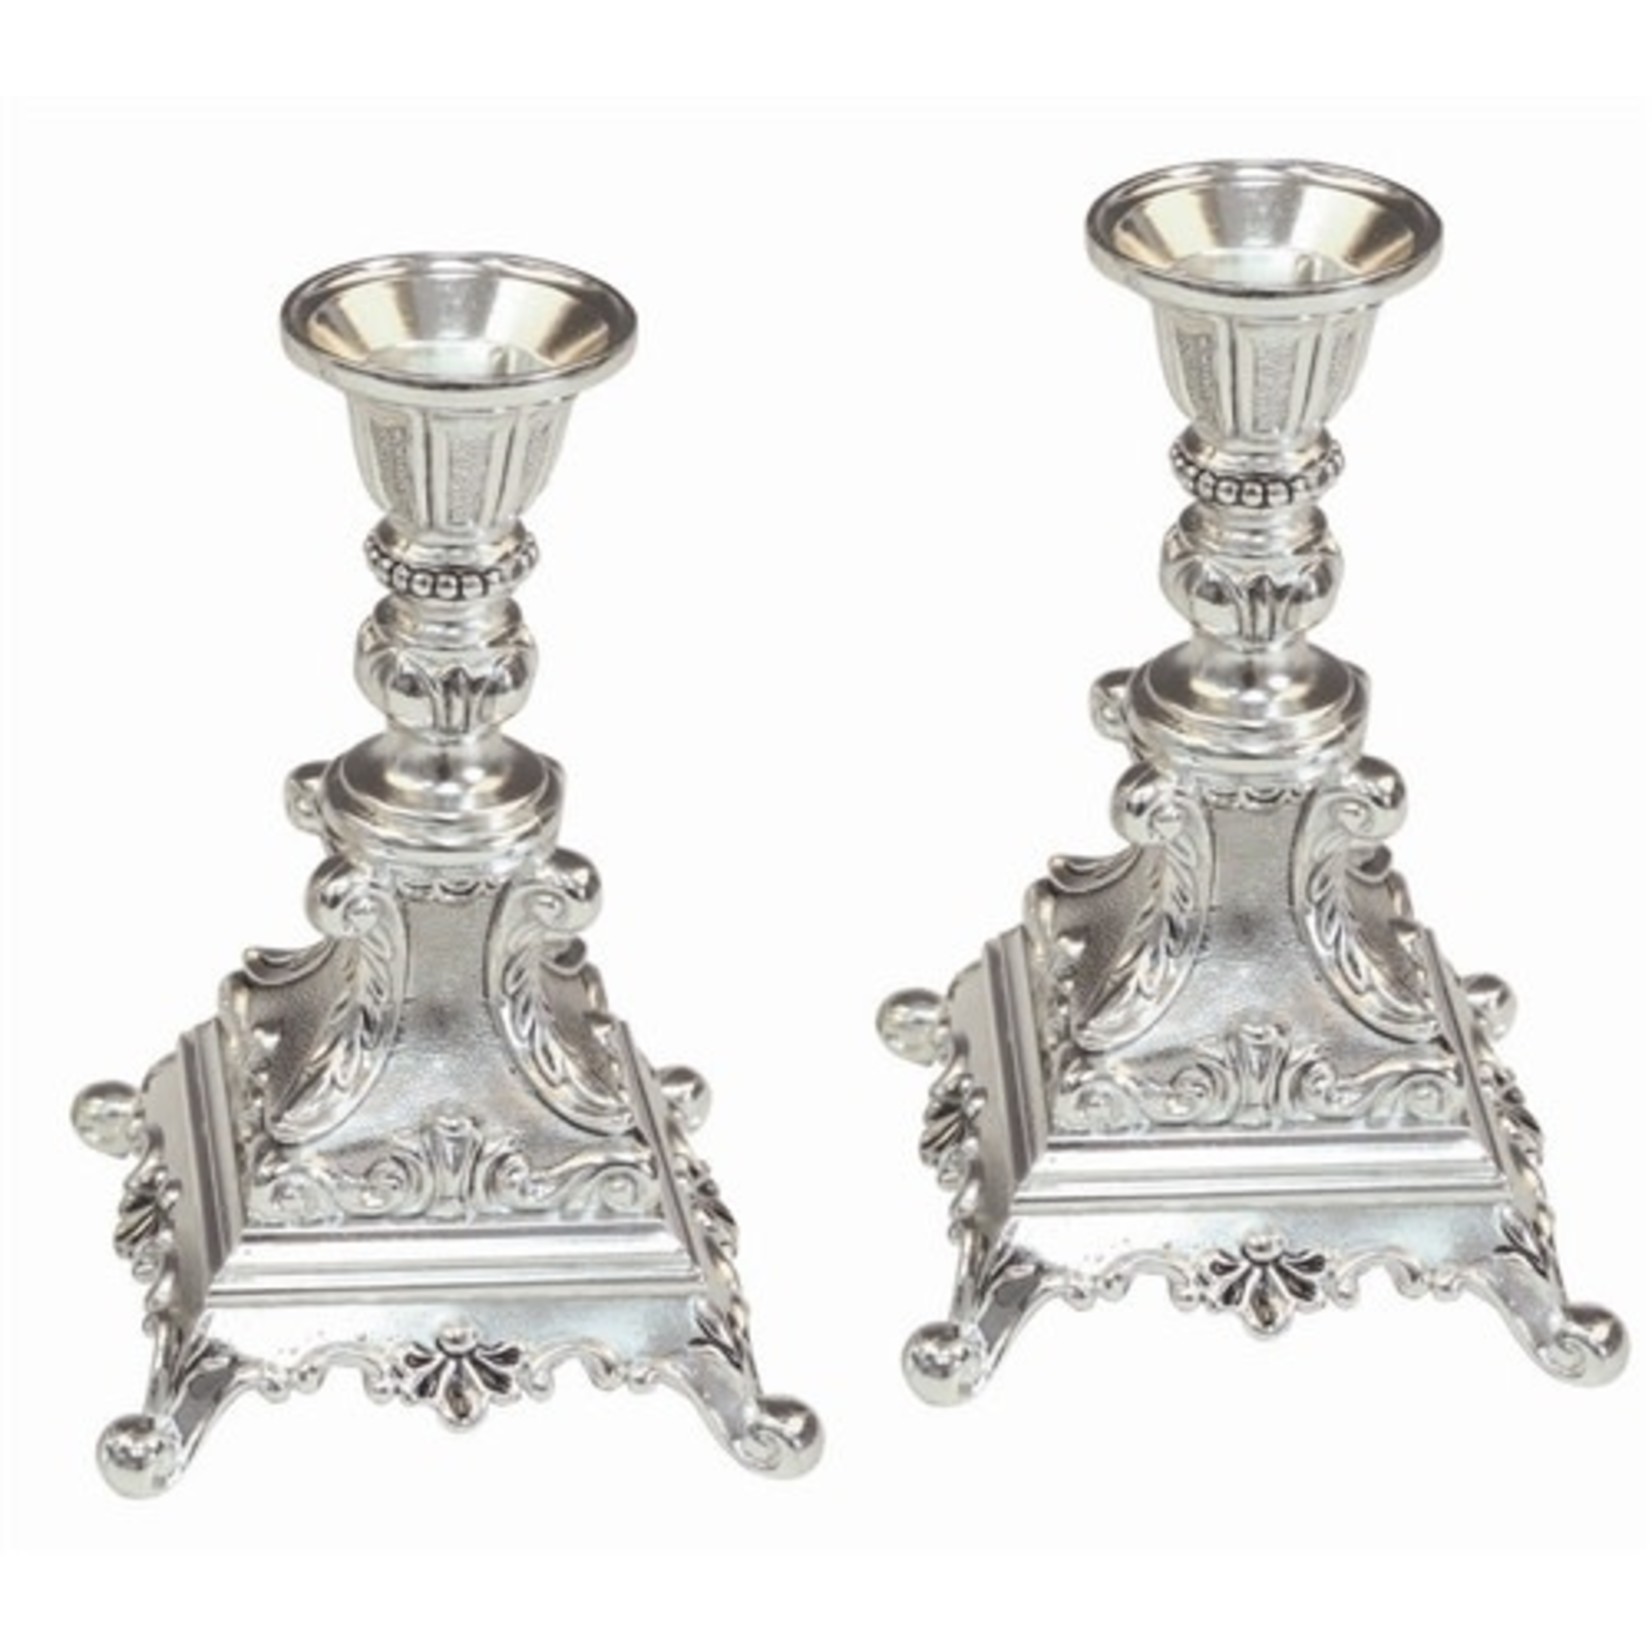 Candlesticks, Silver Plated